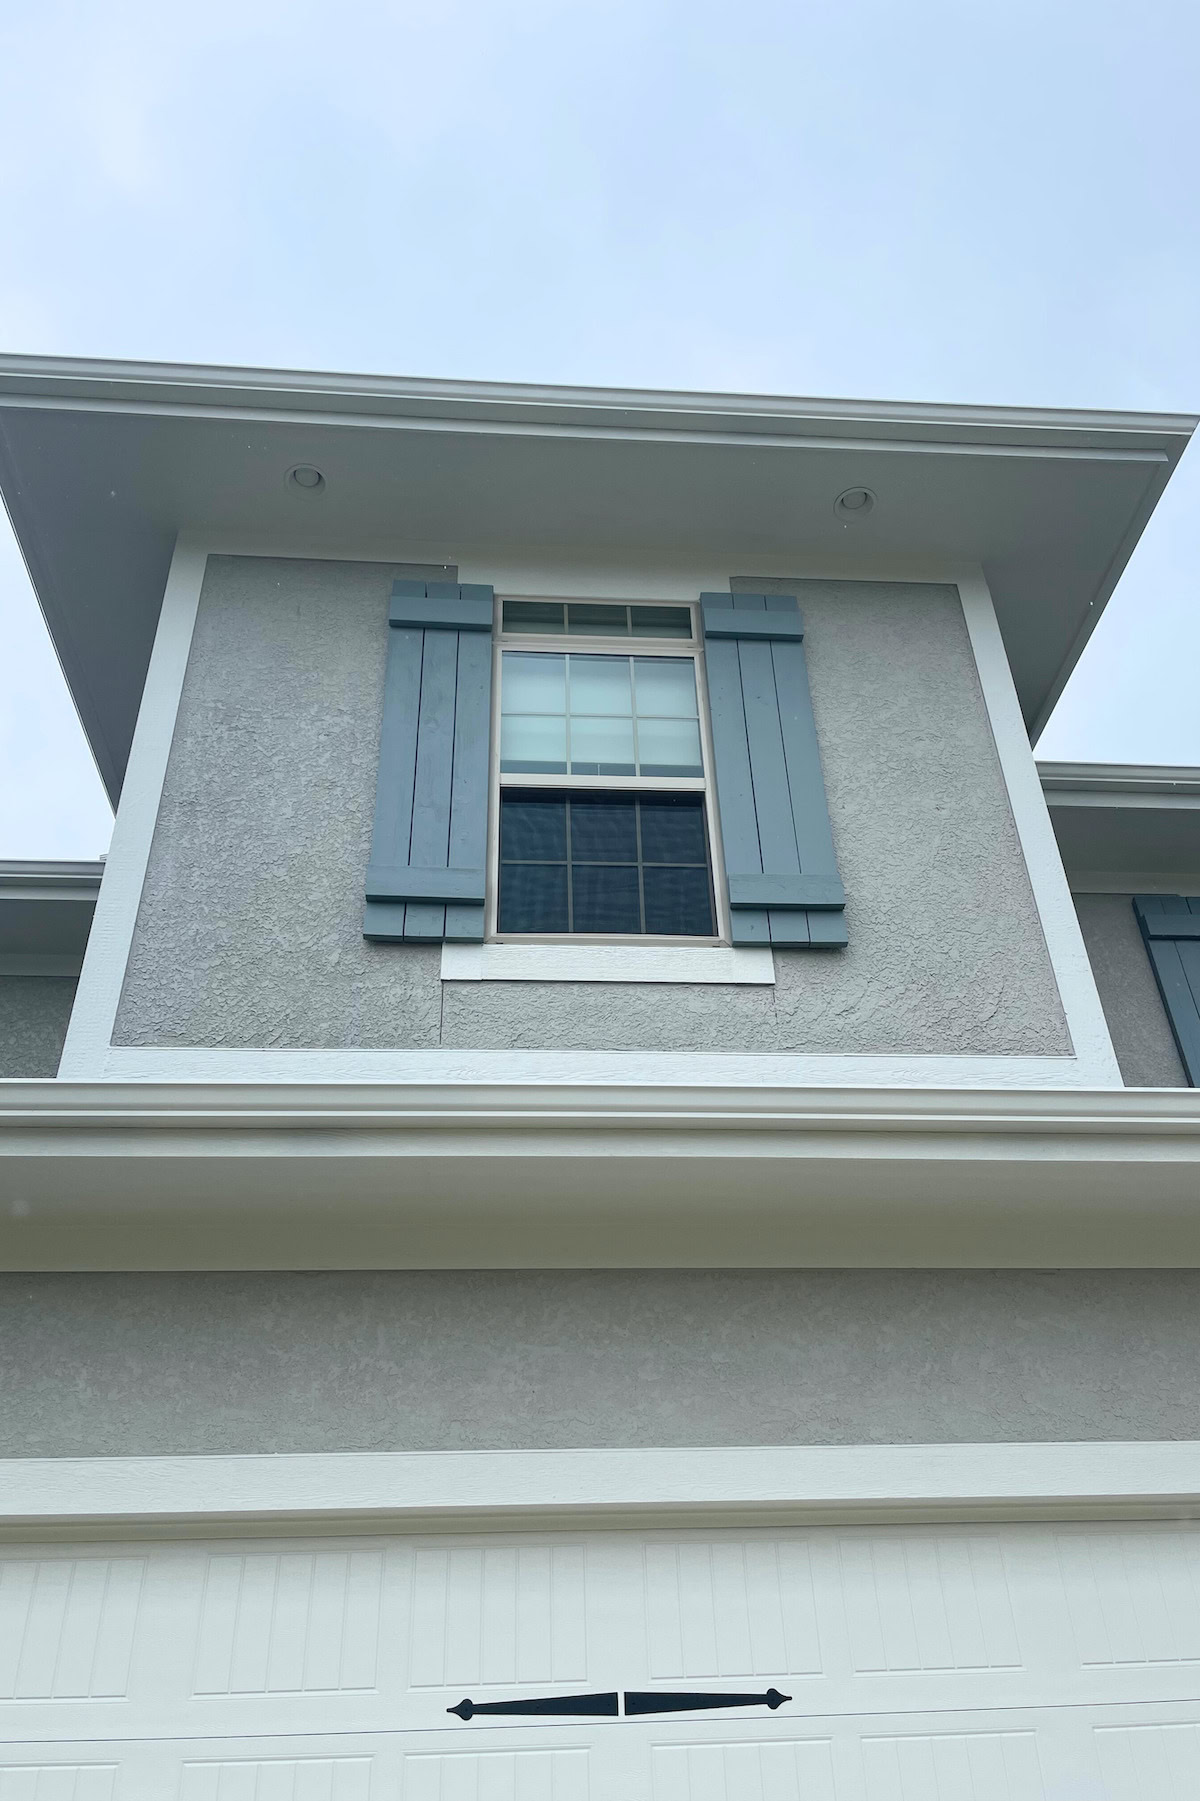 Close-up view of a two-story house's upper window with blue shutters. The Benjamin Moore Brewster Gray exterior and white trim frame the window, and part of a white garage door is visible at the bottom.